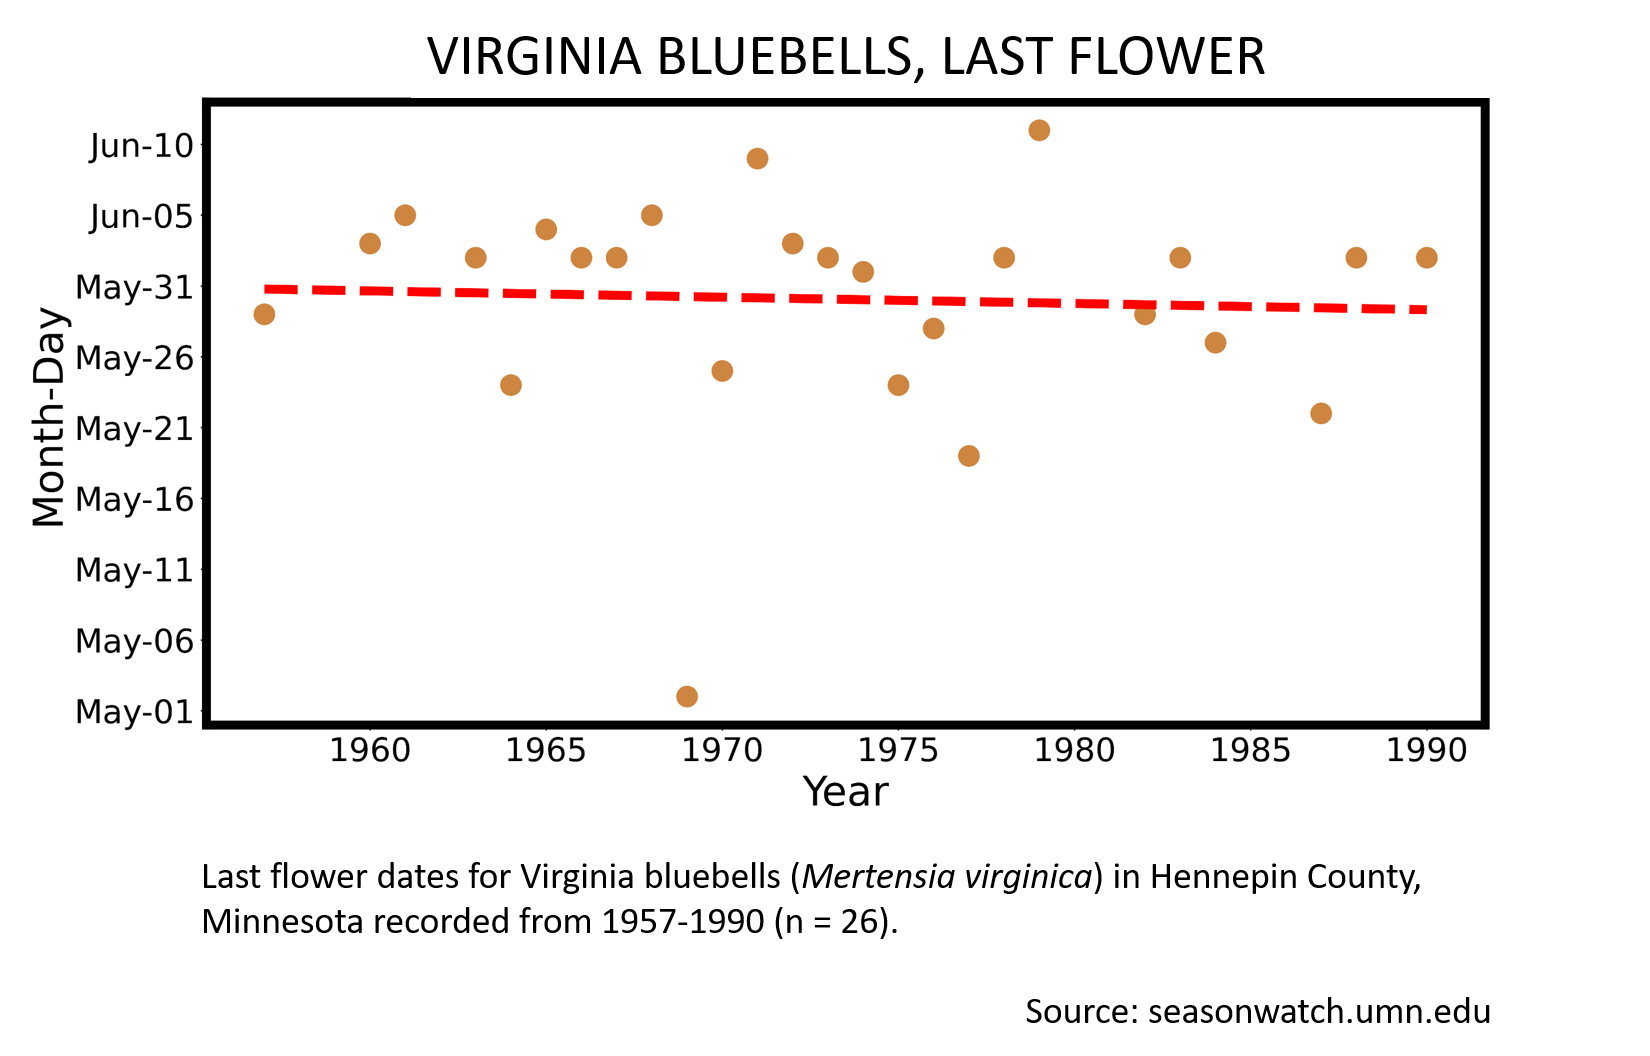 Scatterplot showing Virginia bluebells phenology observations in Hennepin County, Minnesota